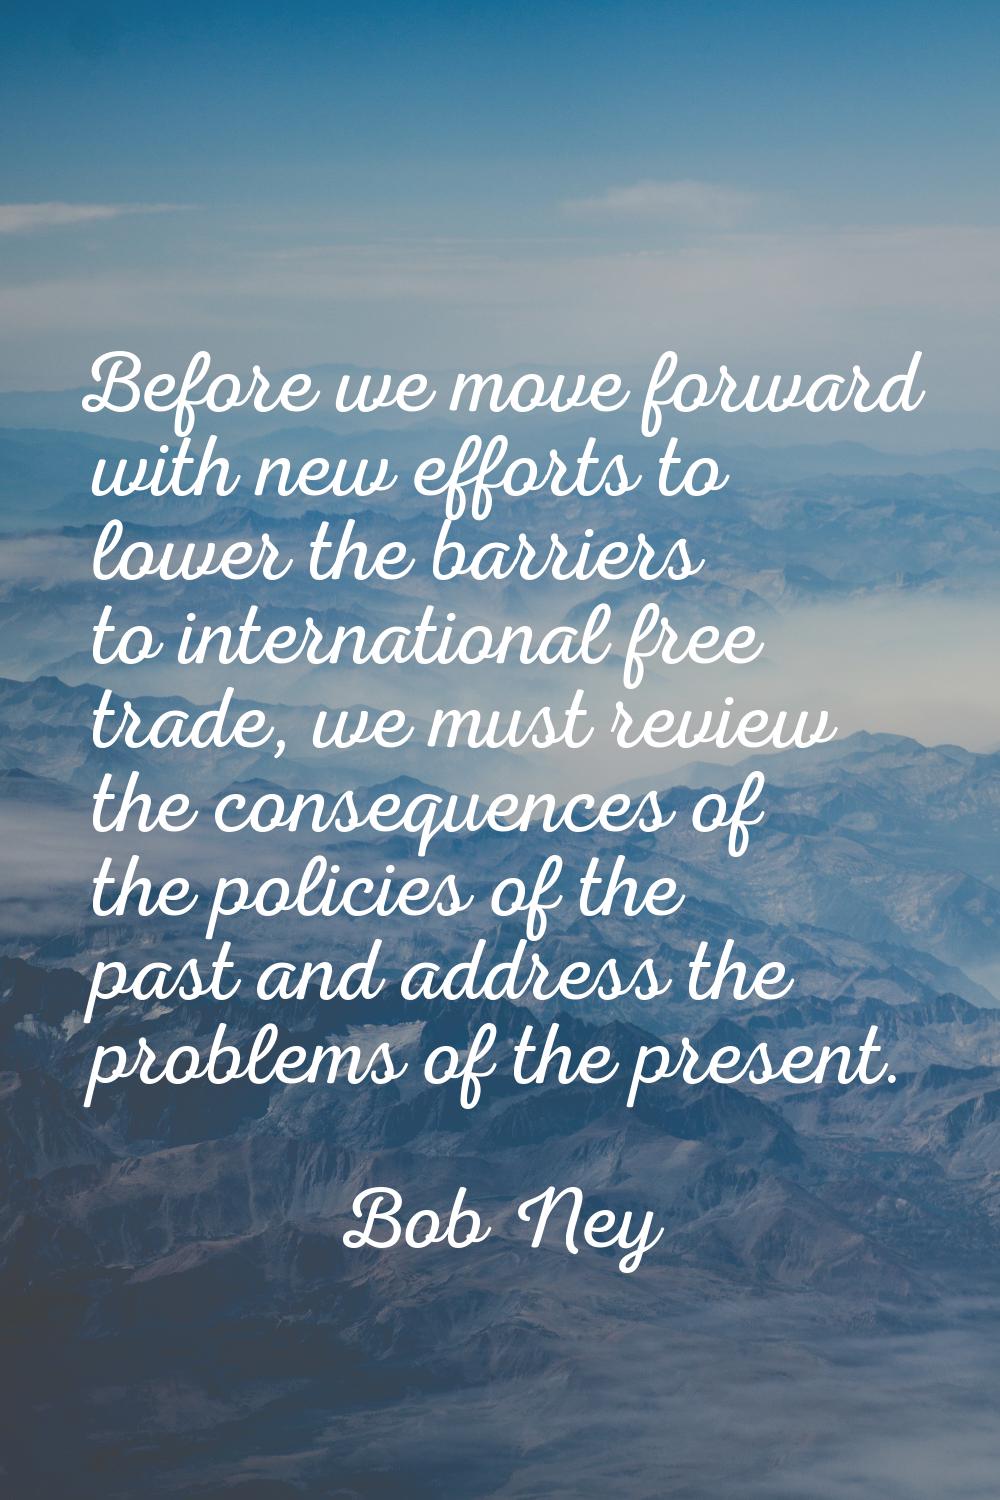 Before we move forward with new efforts to lower the barriers to international free trade, we must 